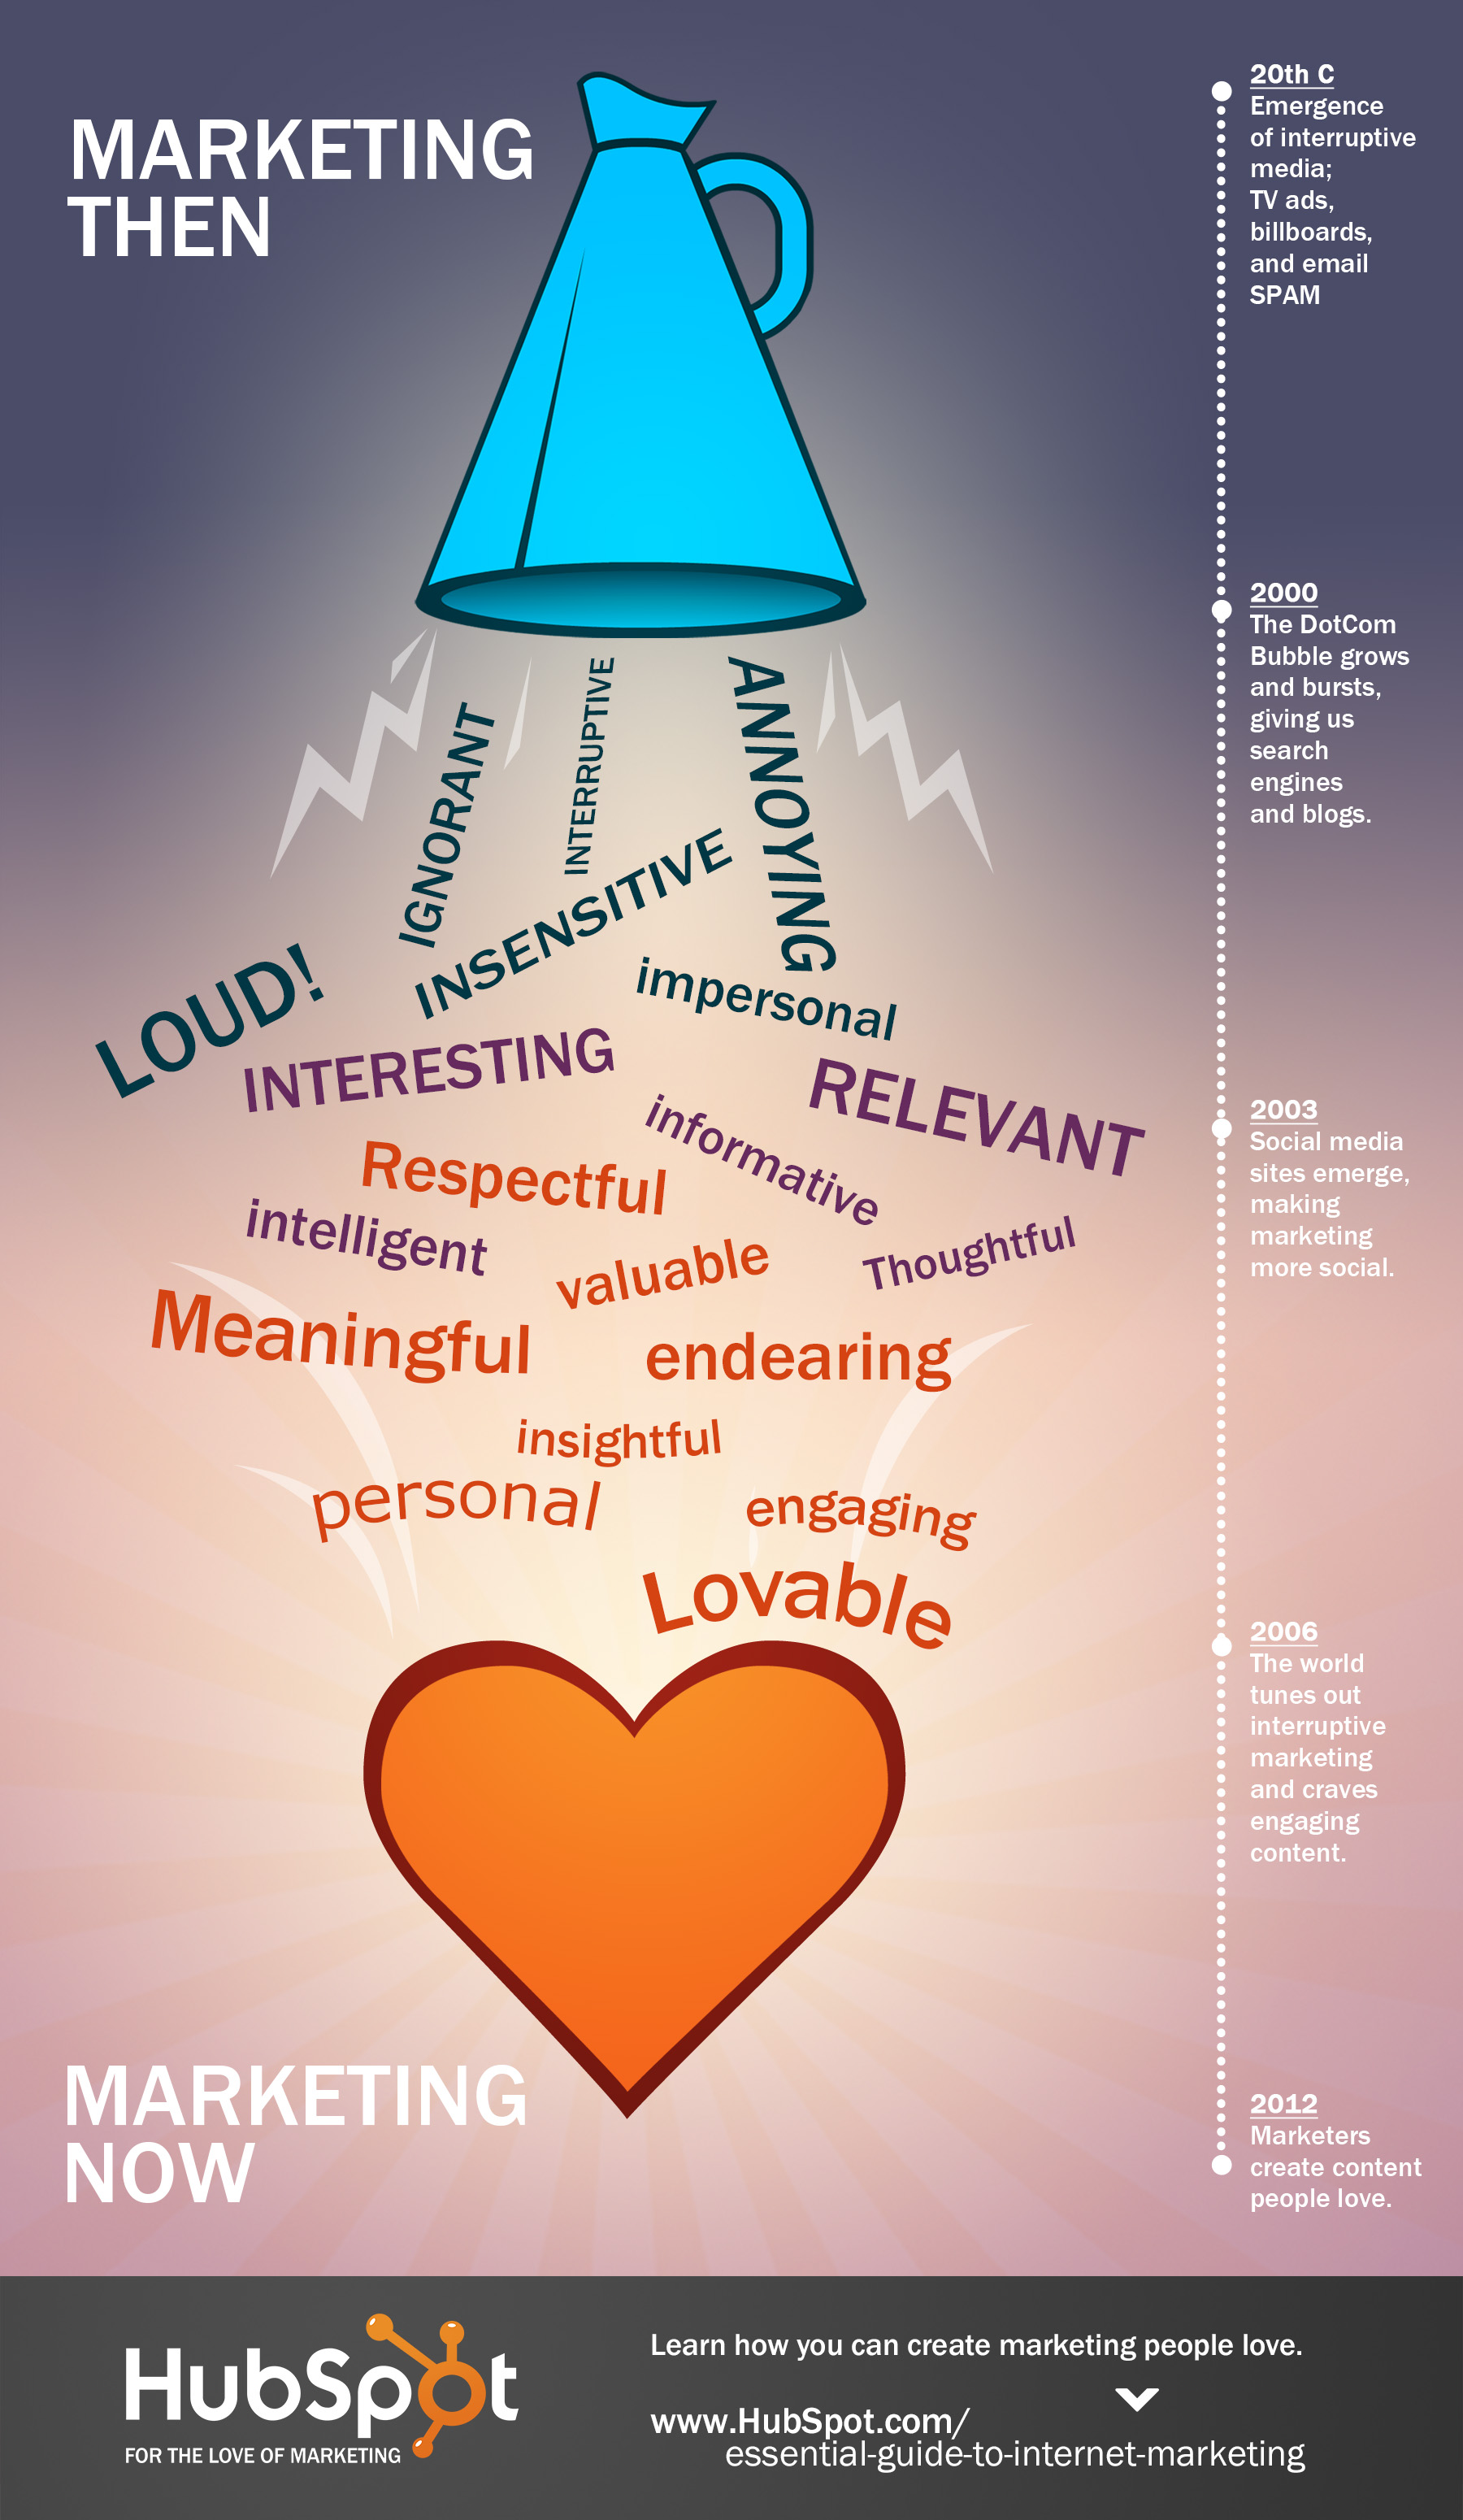 5 Ways to Make Sure Your Marketing Is LOVEABLE